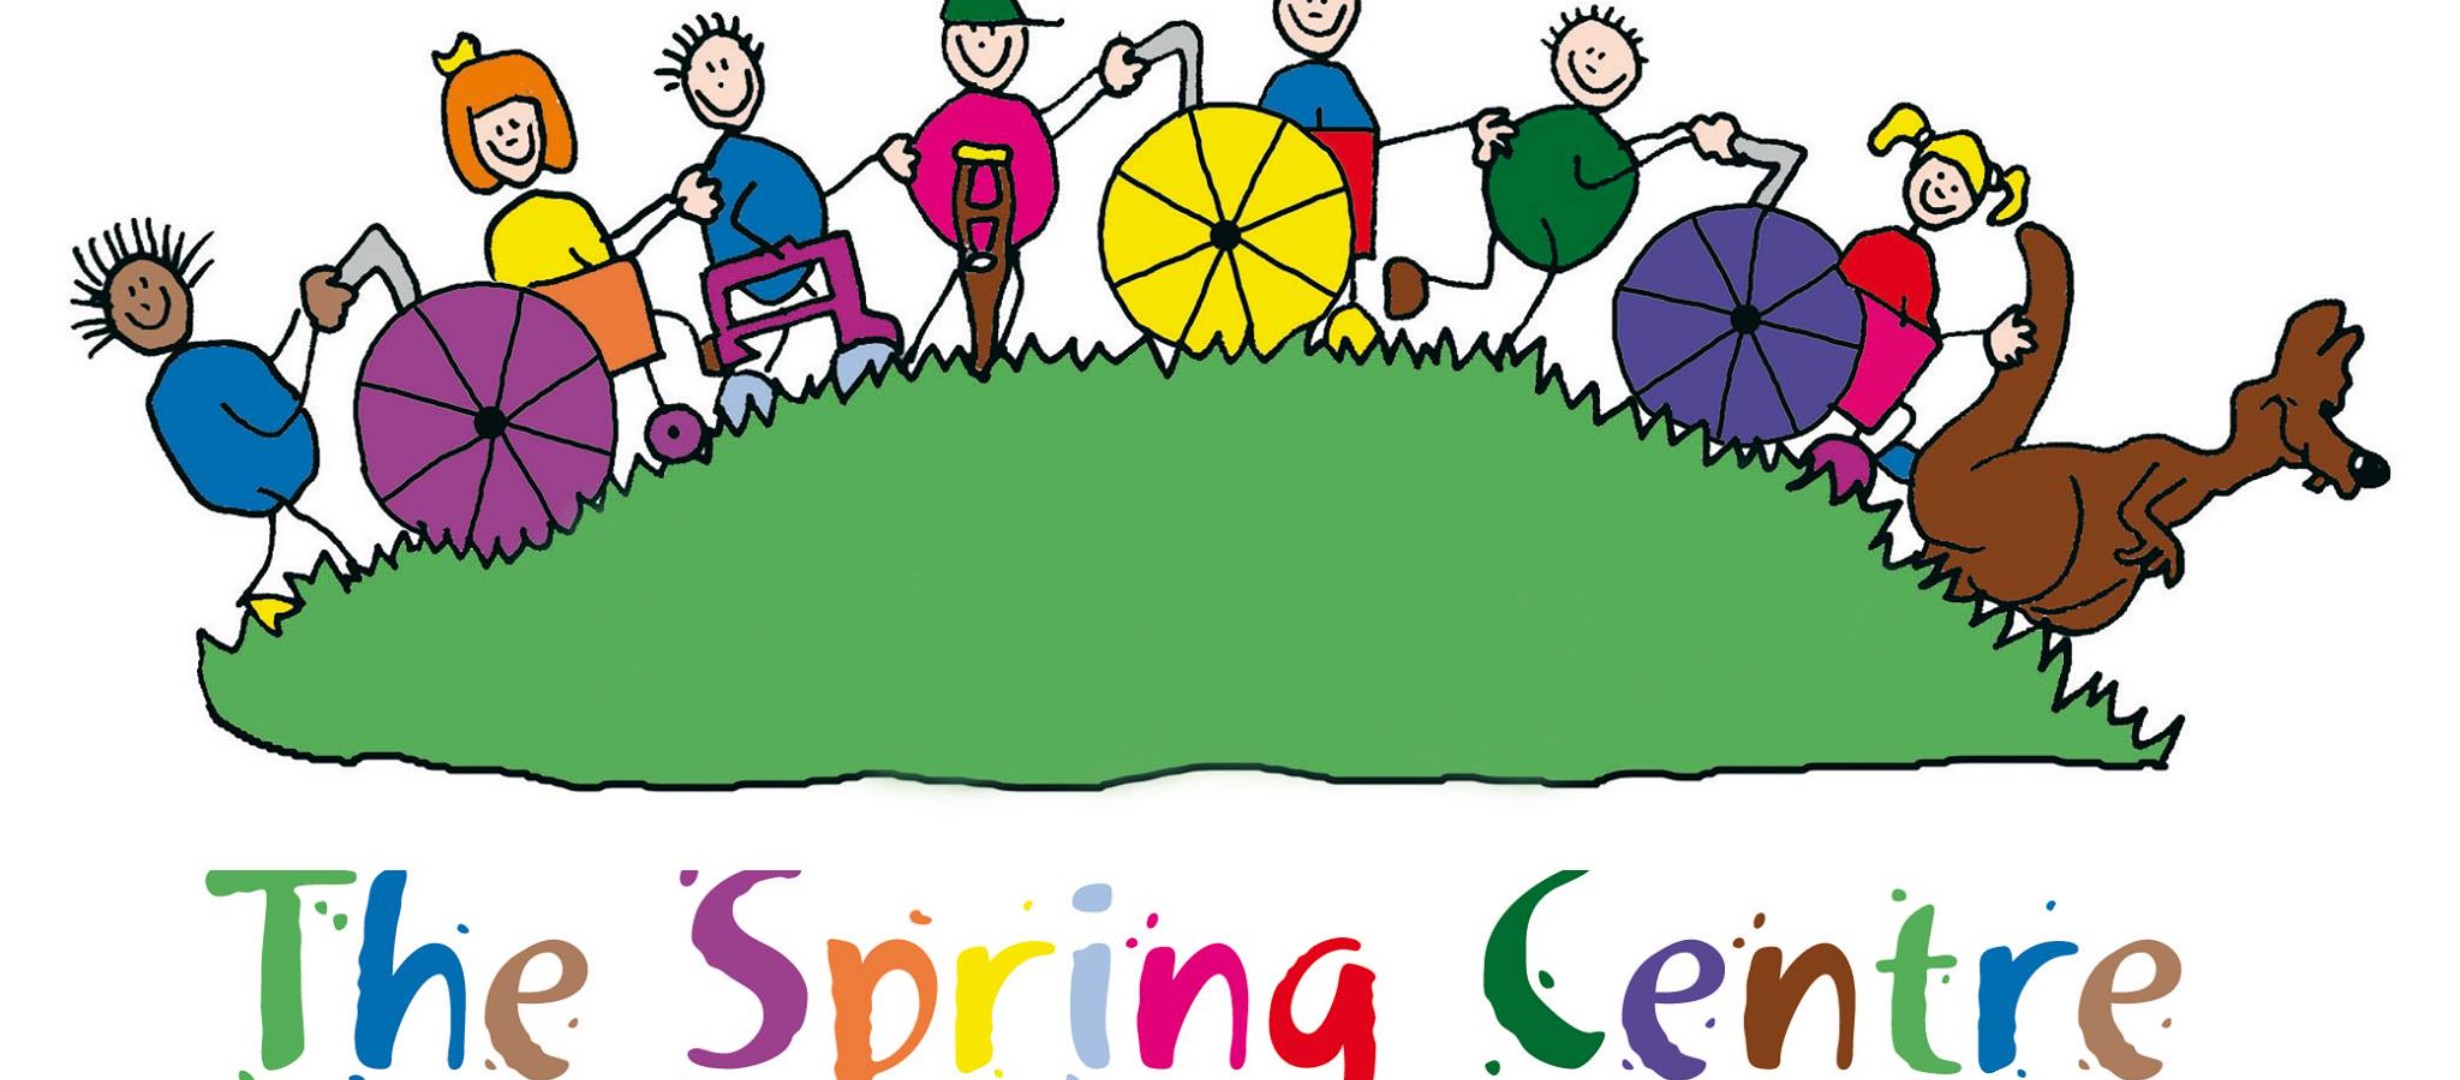 Spring centre logo of a green hill with cartoon people in bright colours, some in wheelchairs, plus a kangaroo